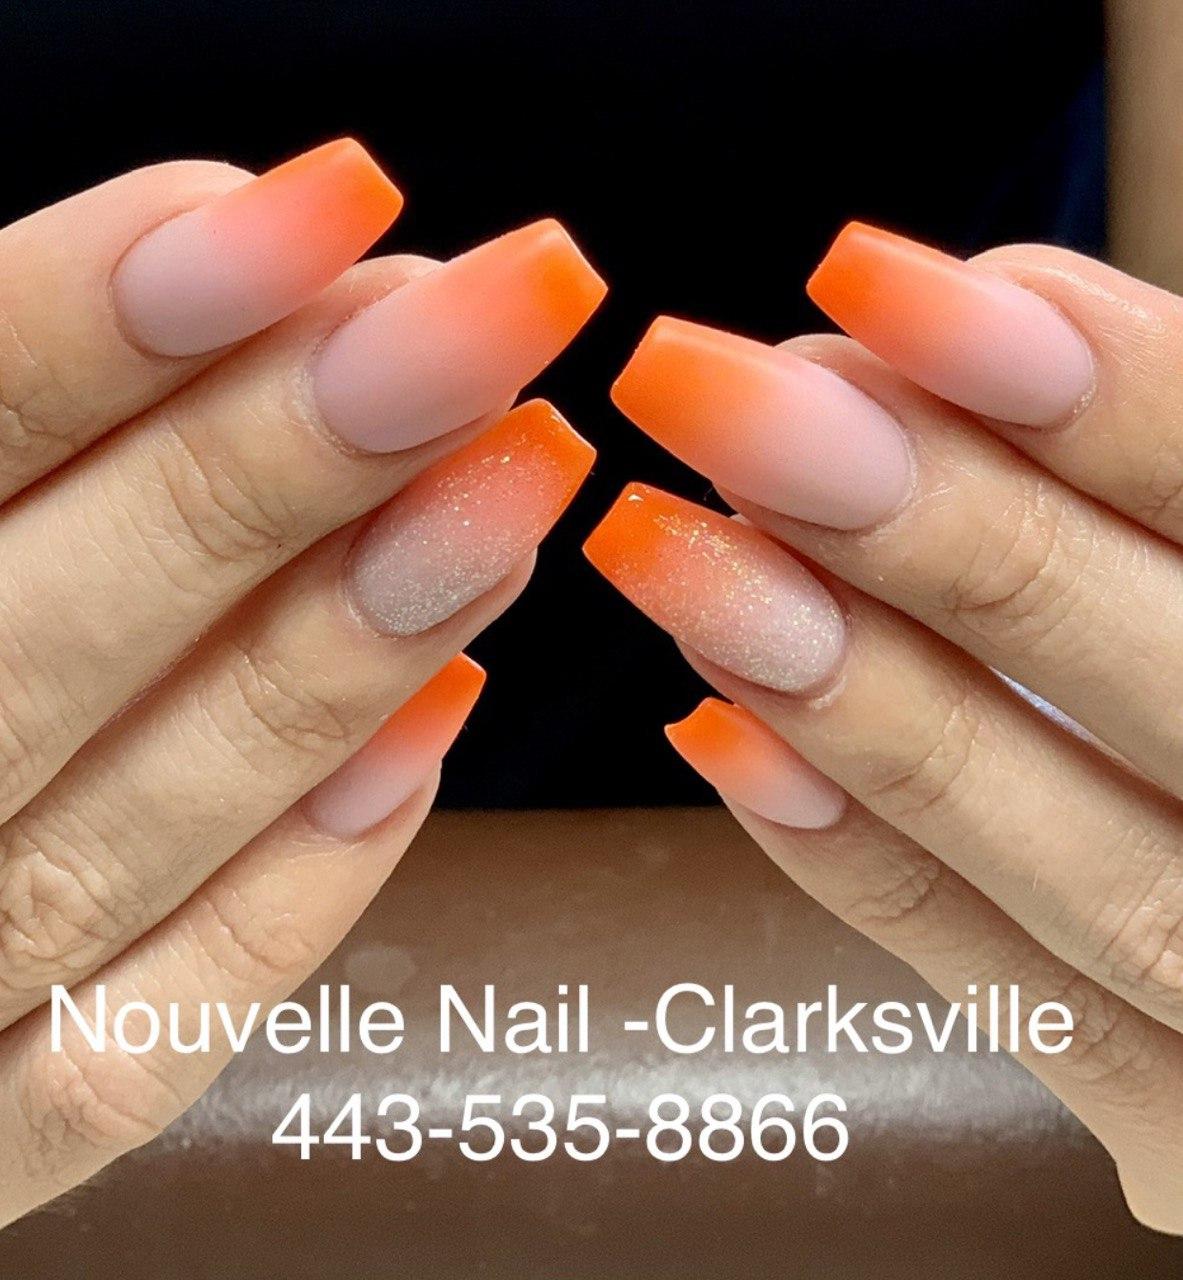 Ombre Nails Collection Done By Nouvelle Nail Spa In Clarksville River Hill Area Nouvelle Nail Spa